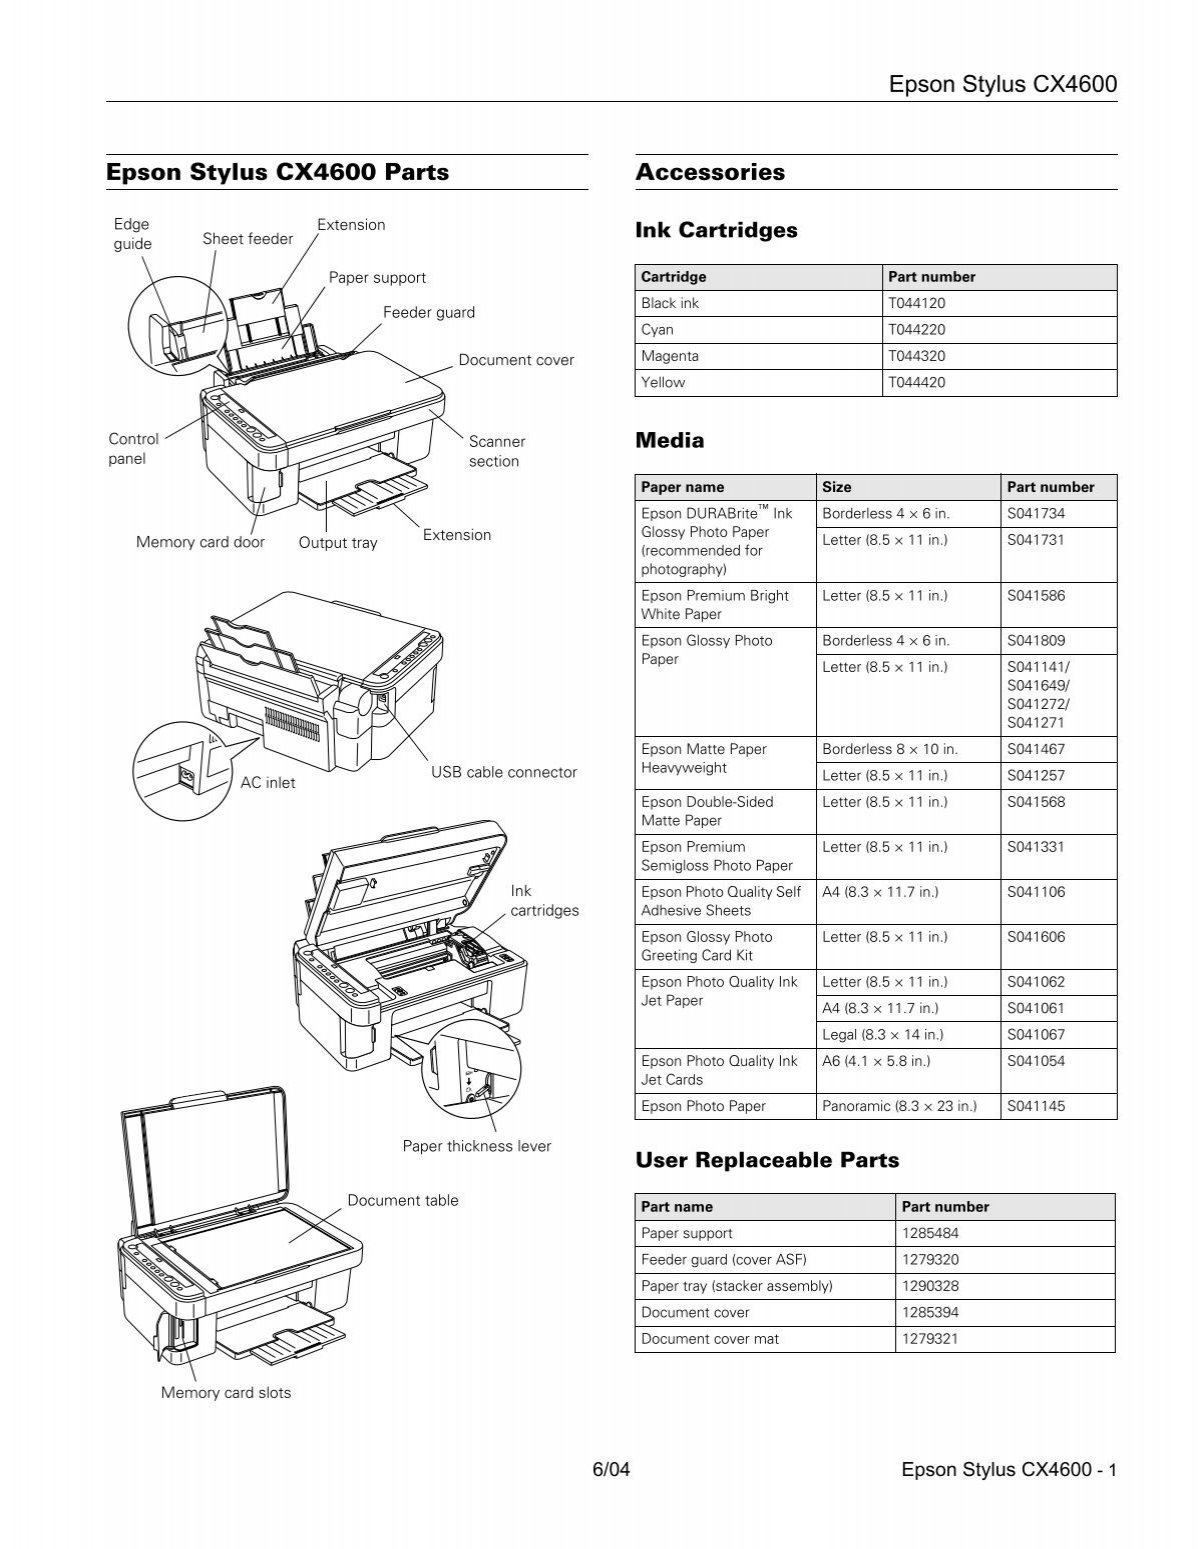 Epson Epson Stylus Cx4600 All In One Printer Product Information Guide 7873